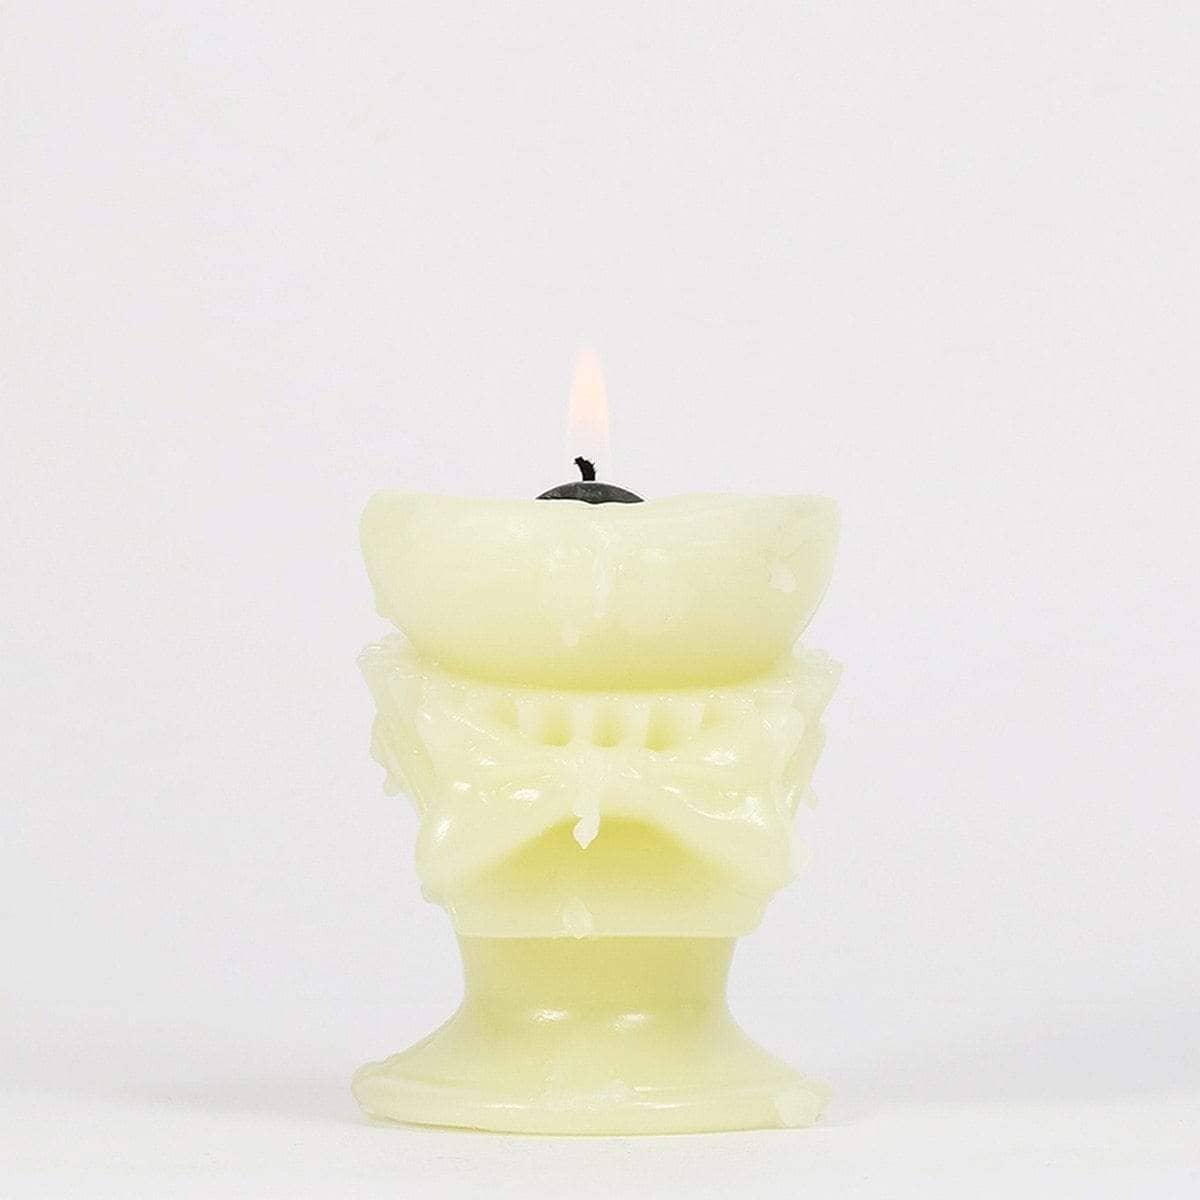 Feline Frenzy Kitten Skeleton Candle: Unique Scented Home Decor